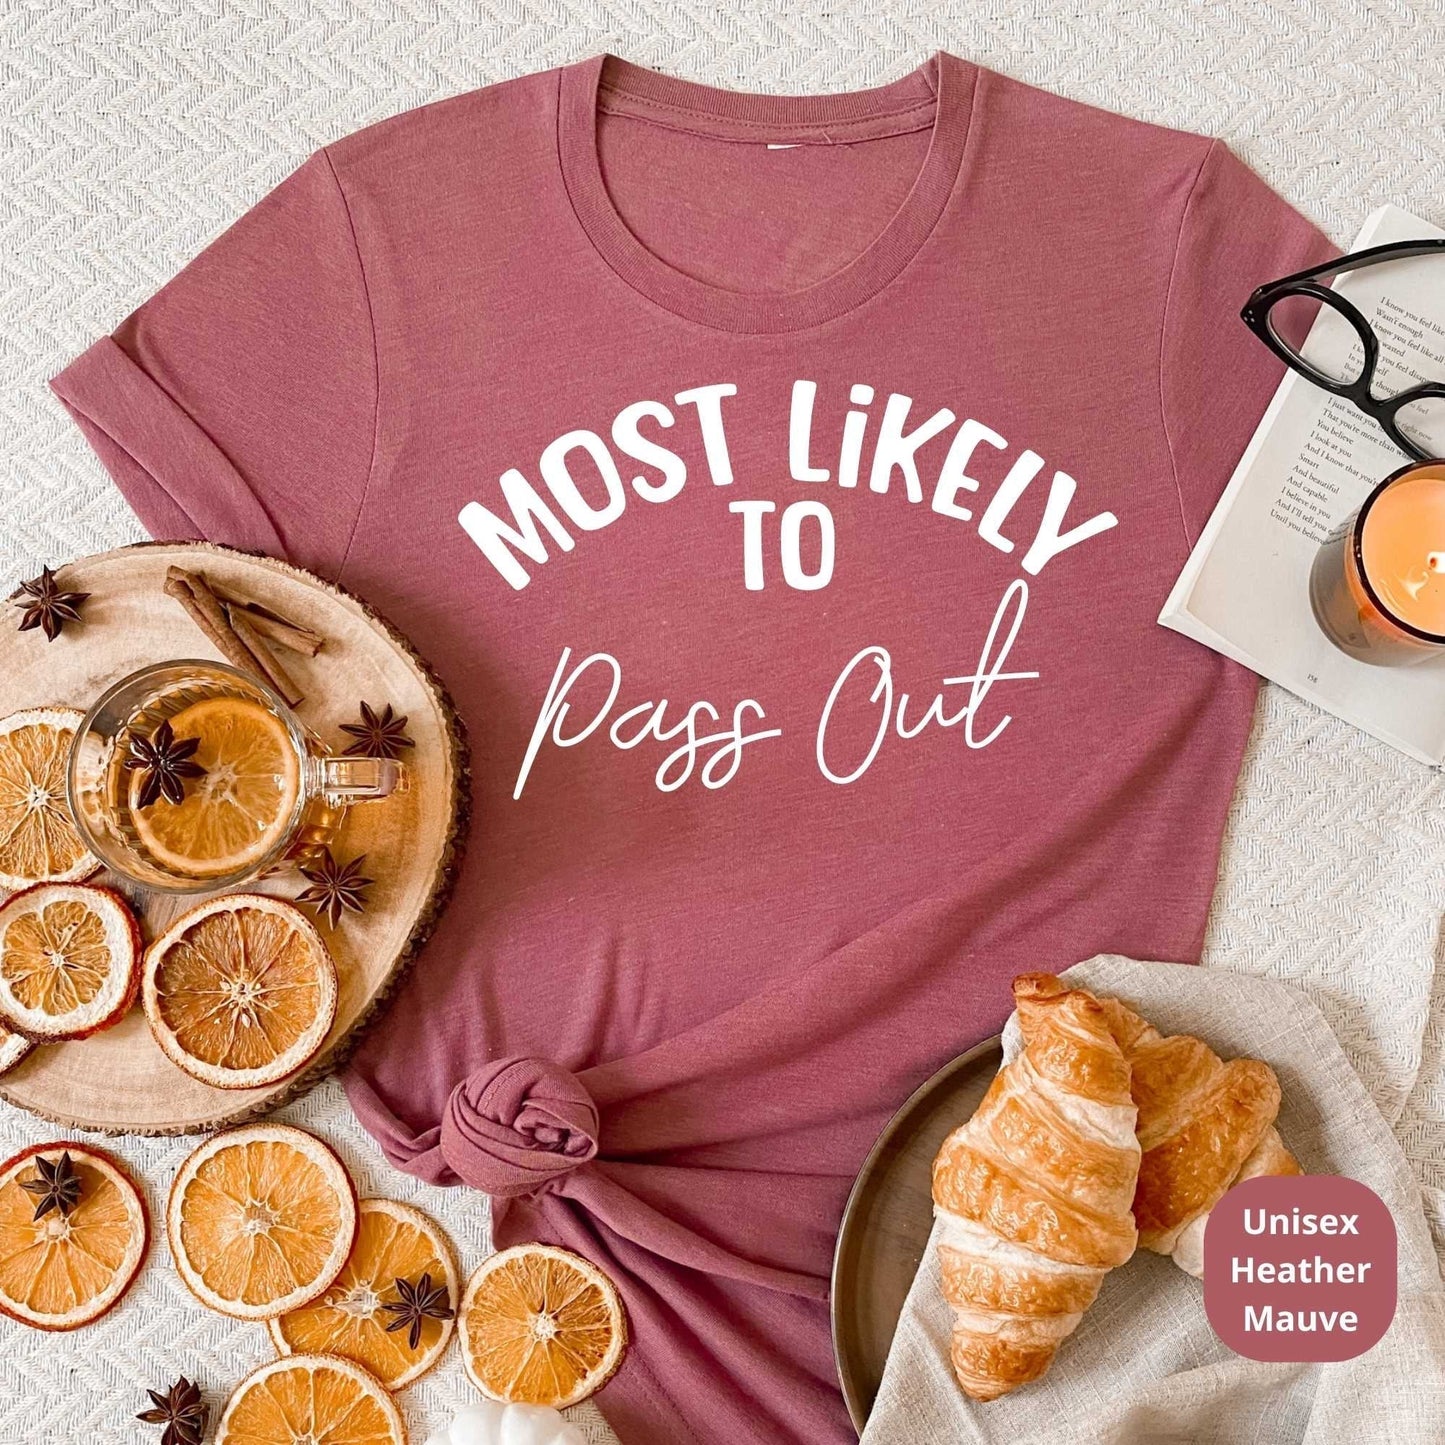 Most Likely To Bachelorette Party Shirts, Bridesmaids Gifts